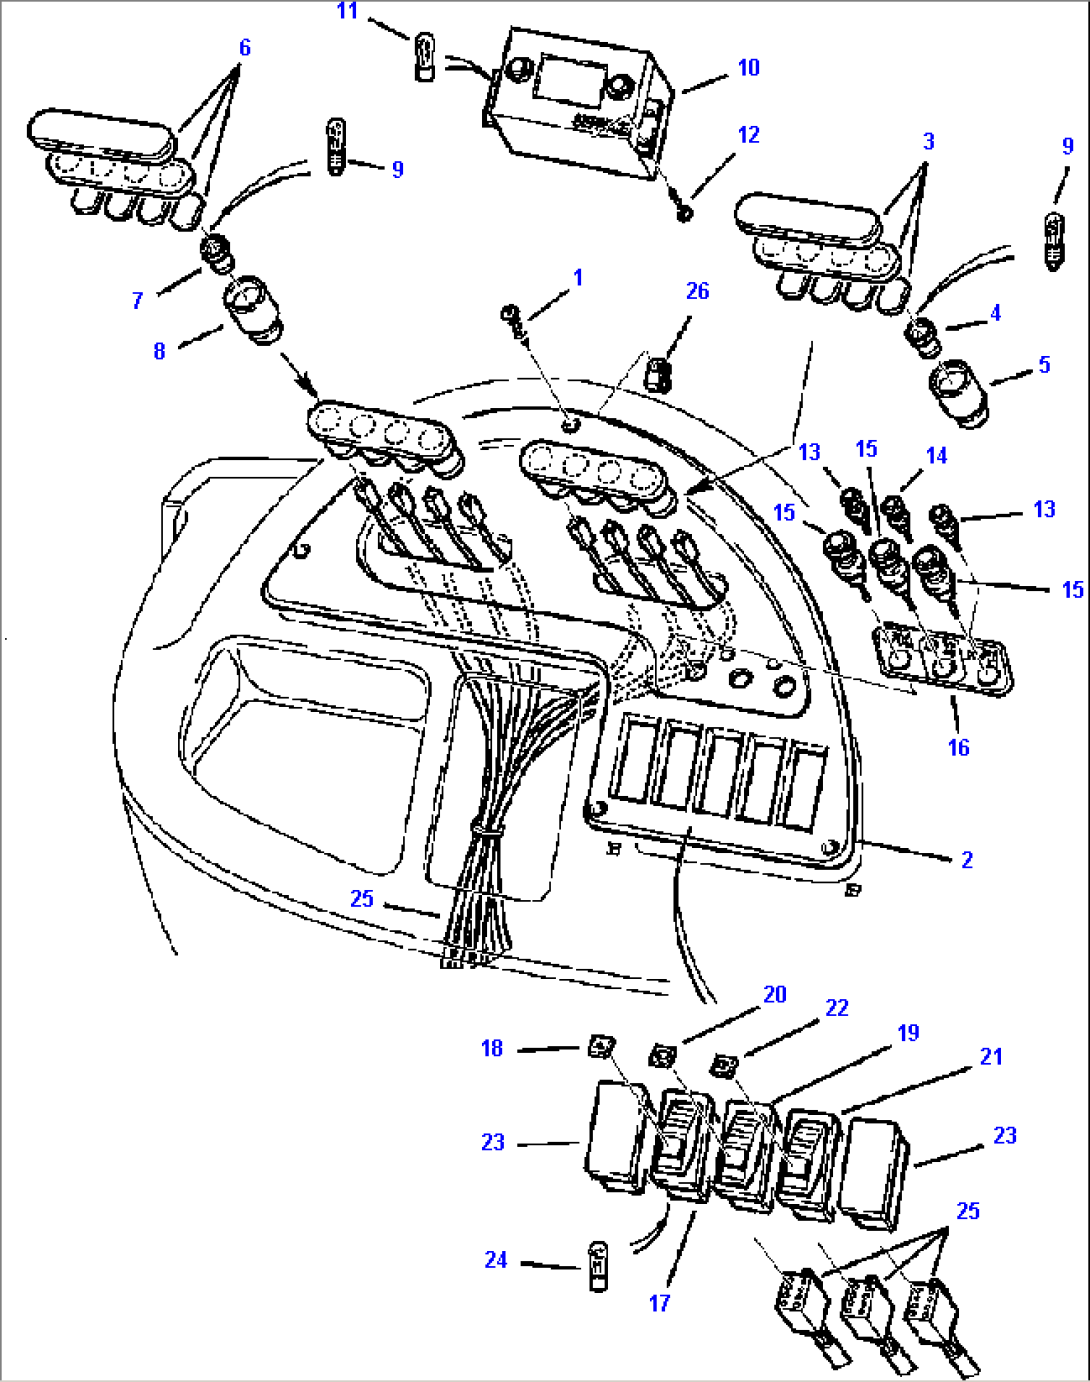 FIG. E1401-01A2 FRONT DASHBOARD